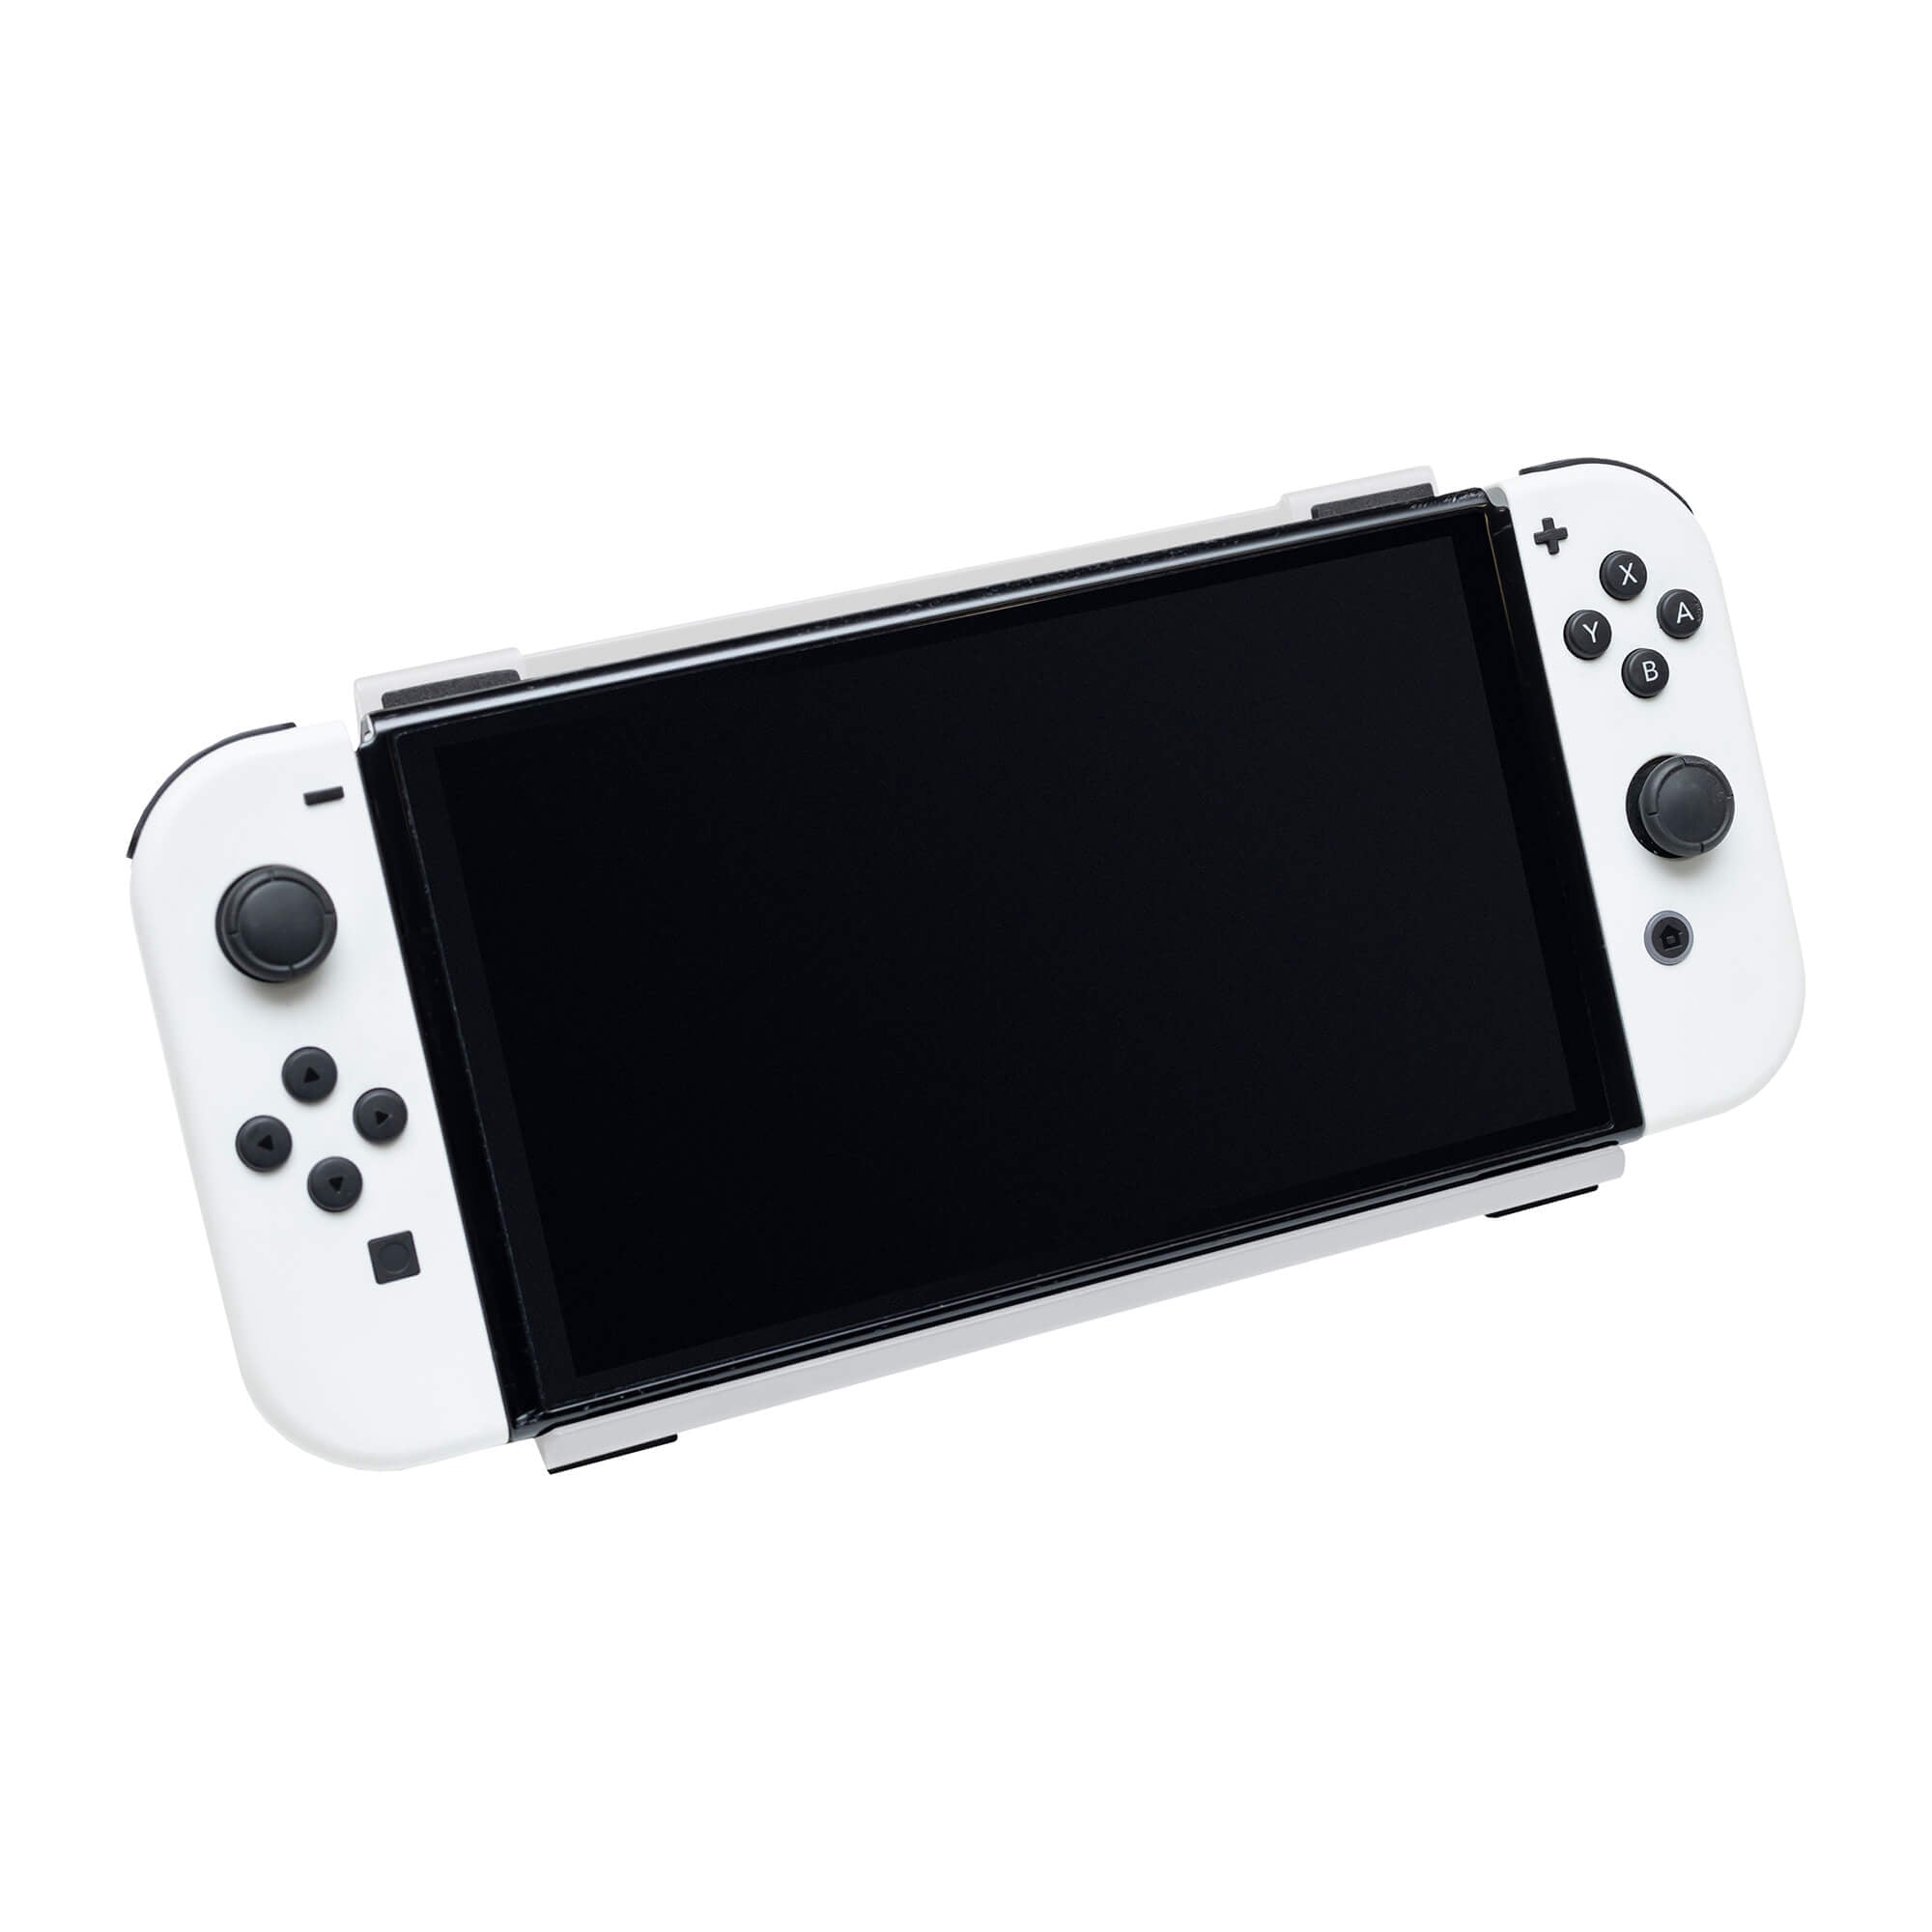 HIDEit Key Mount is available in white to blend seamlessly with white gaming devices like the Nintendo Switch Lite.